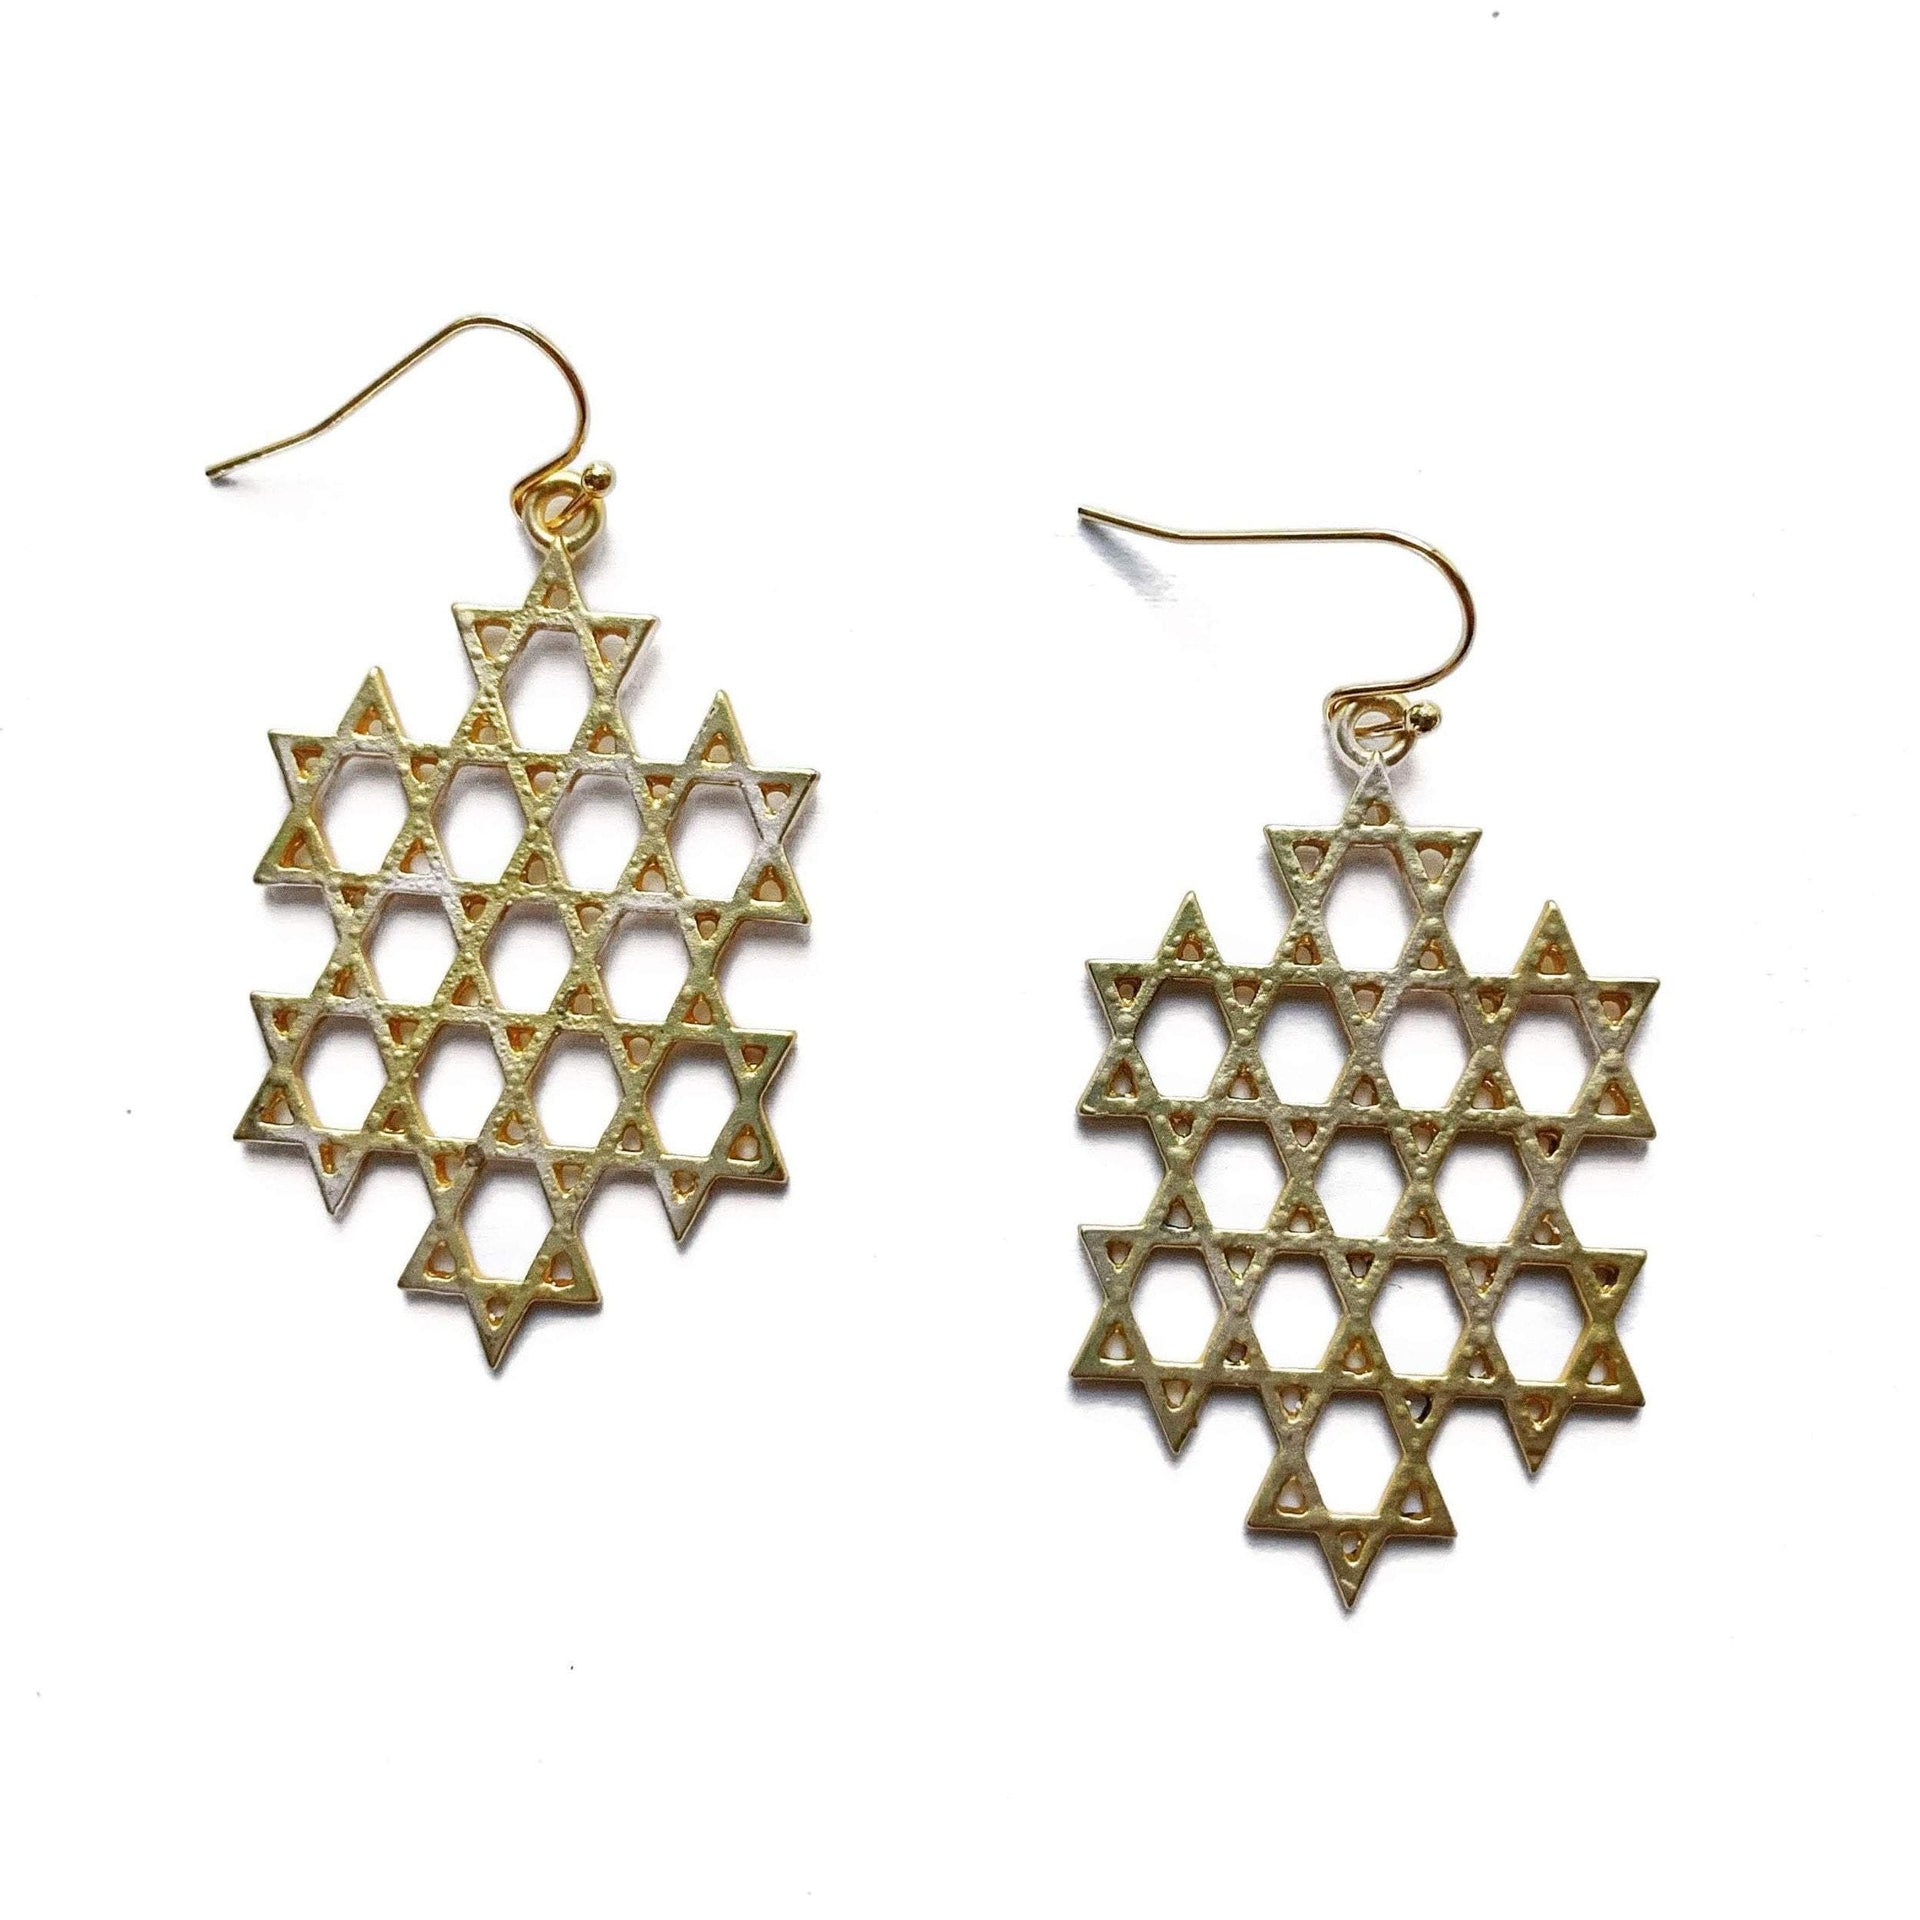 Stitch and Stone Earrings Gold Star of David Dangle Earrings